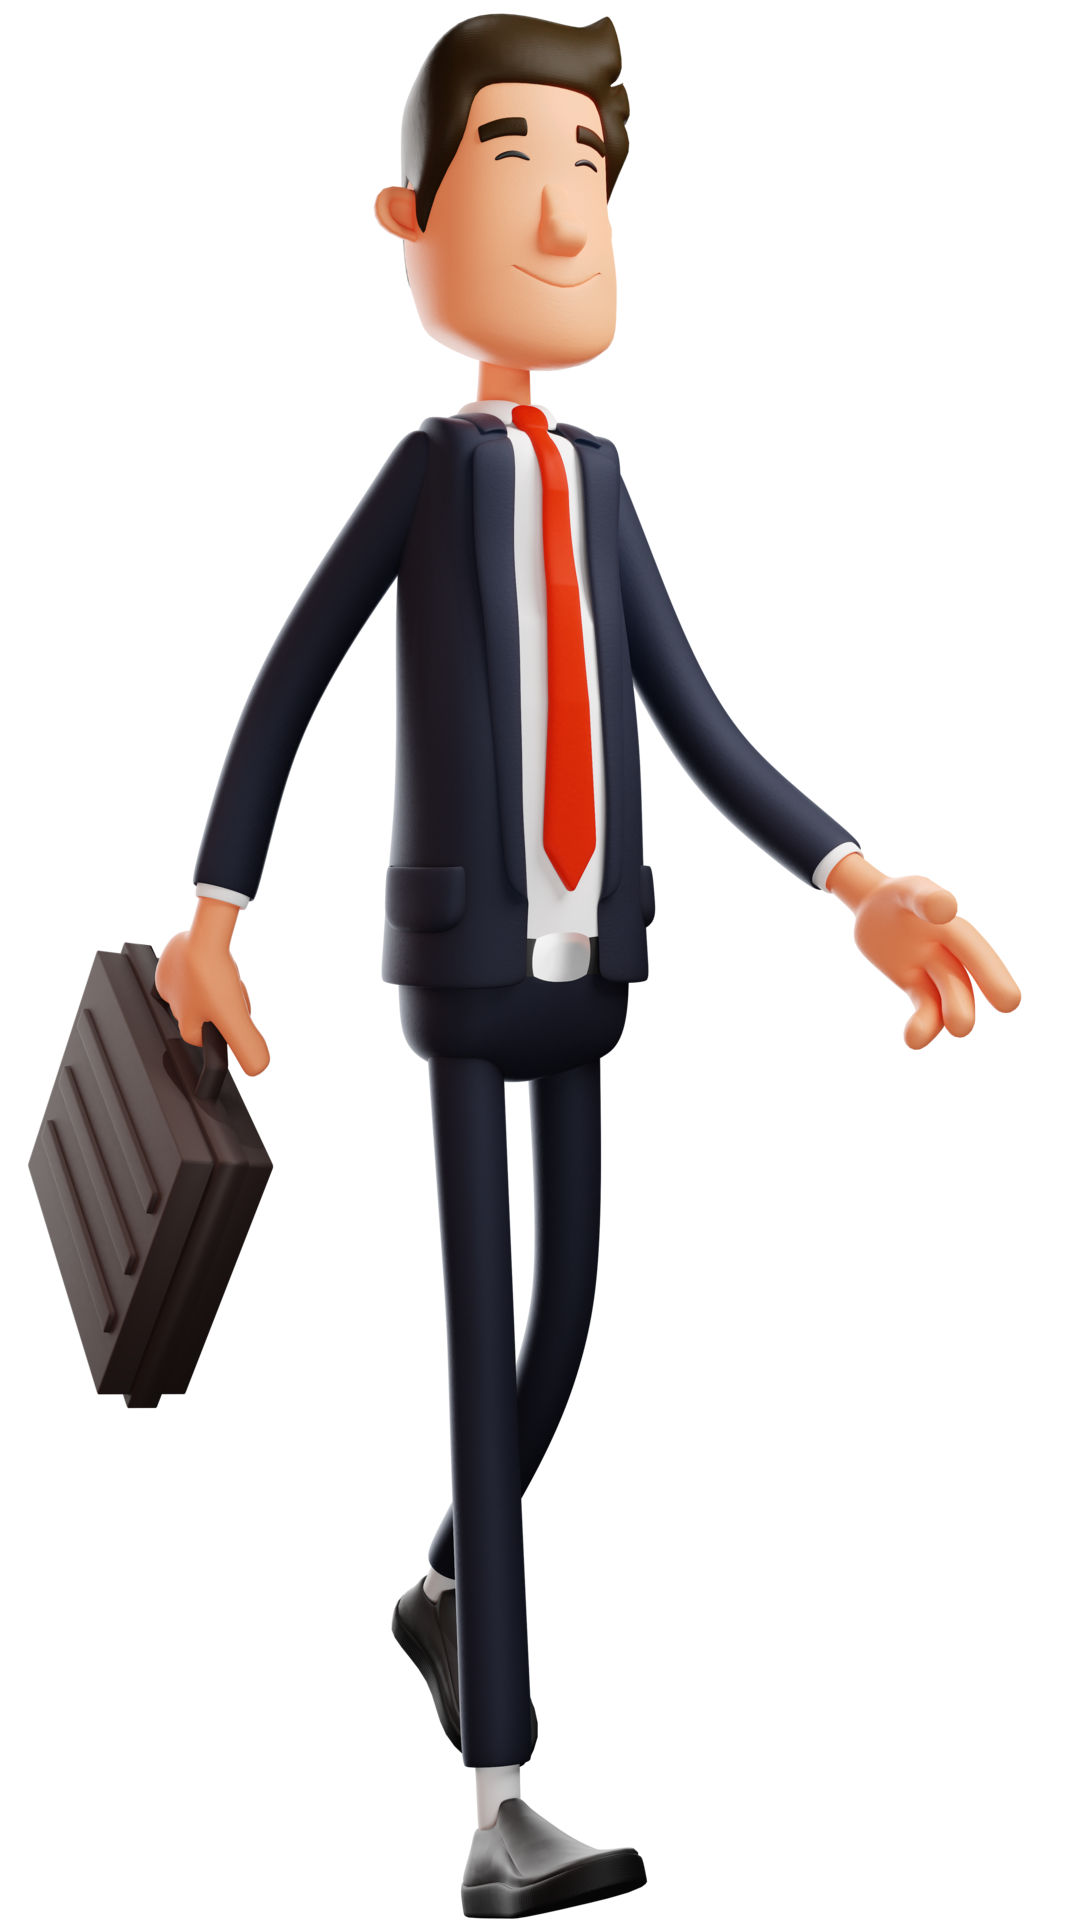 Free 3D illustration. Handsome Office Worker Cartoon 3D Character. Office  workers walk to the office. Office workers smile sweetly. 3D Cartoon  Character 16717196 PNG with Transparent Background